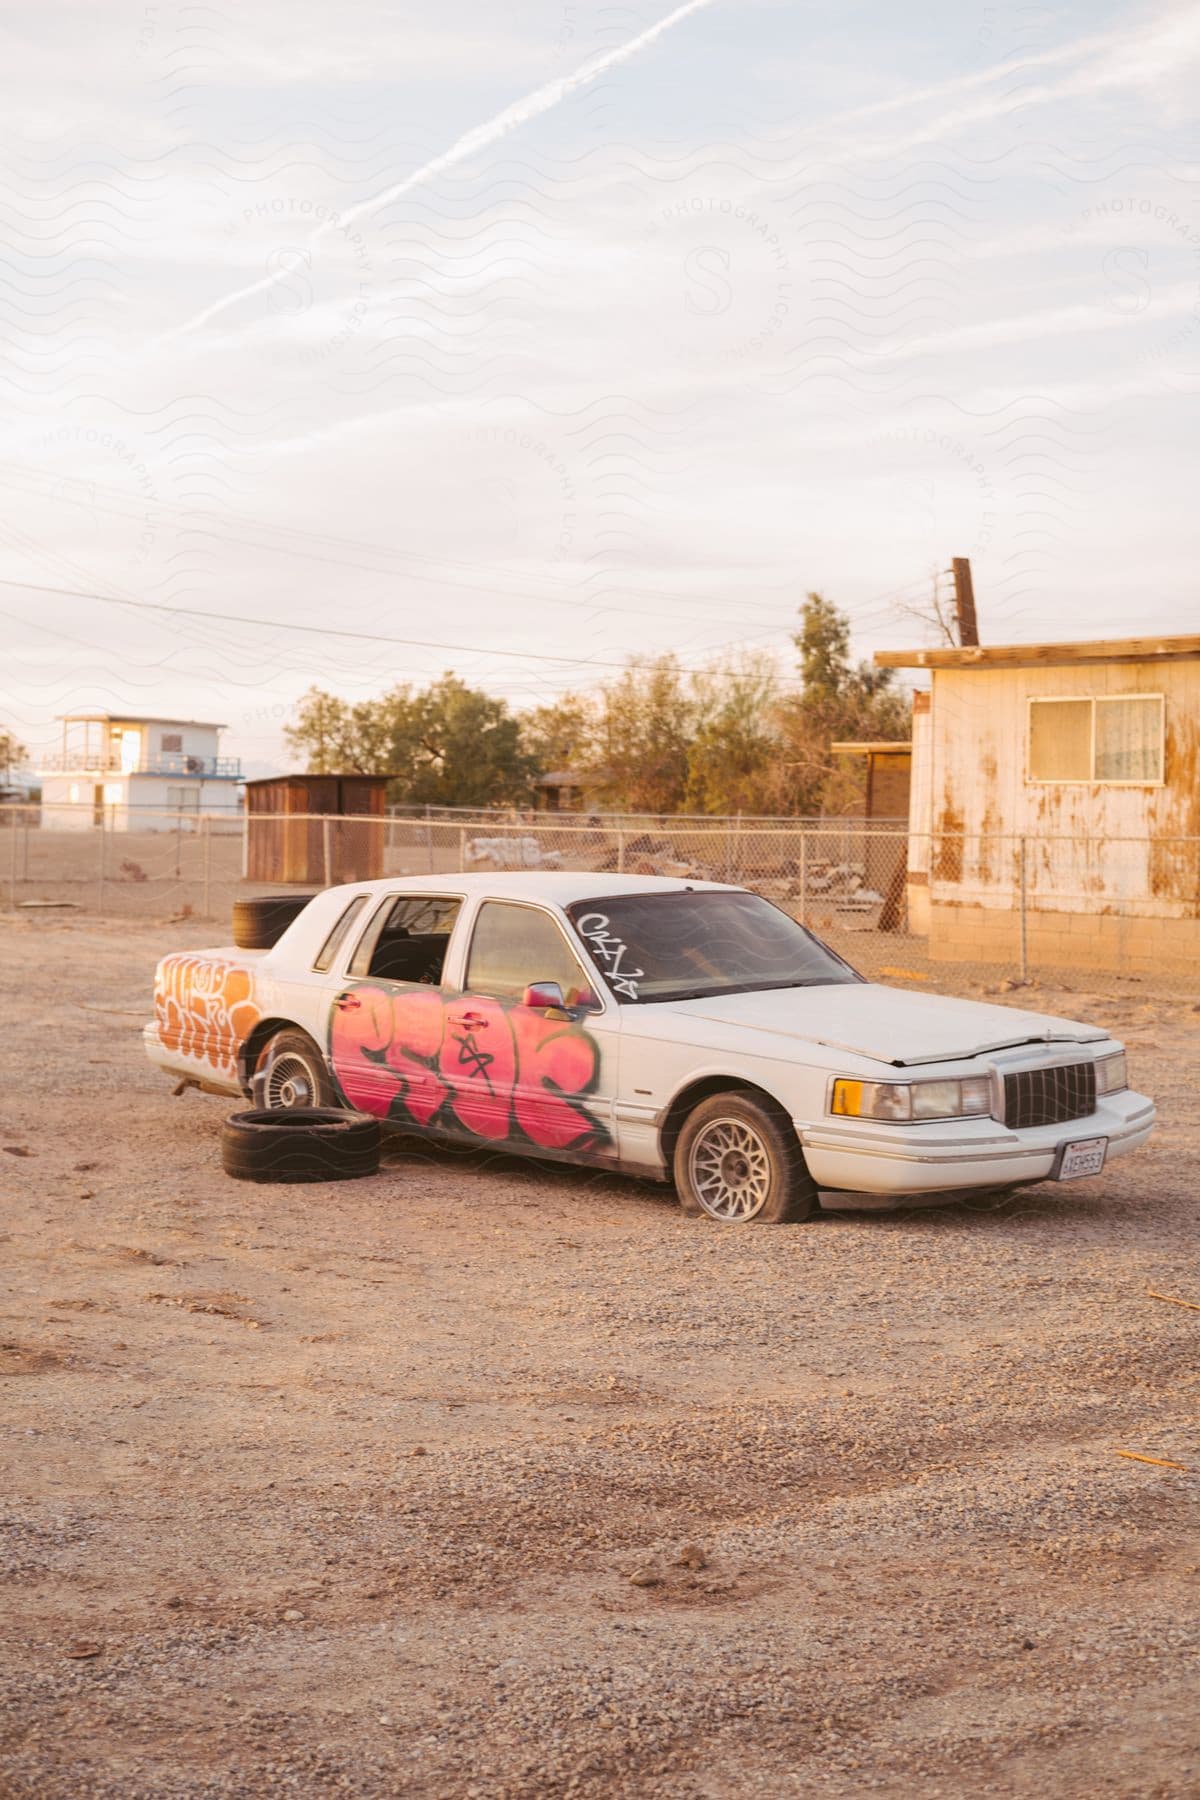 An abandoned car with broken windows and flat tires in an empty parking lot with graffiti painted on it